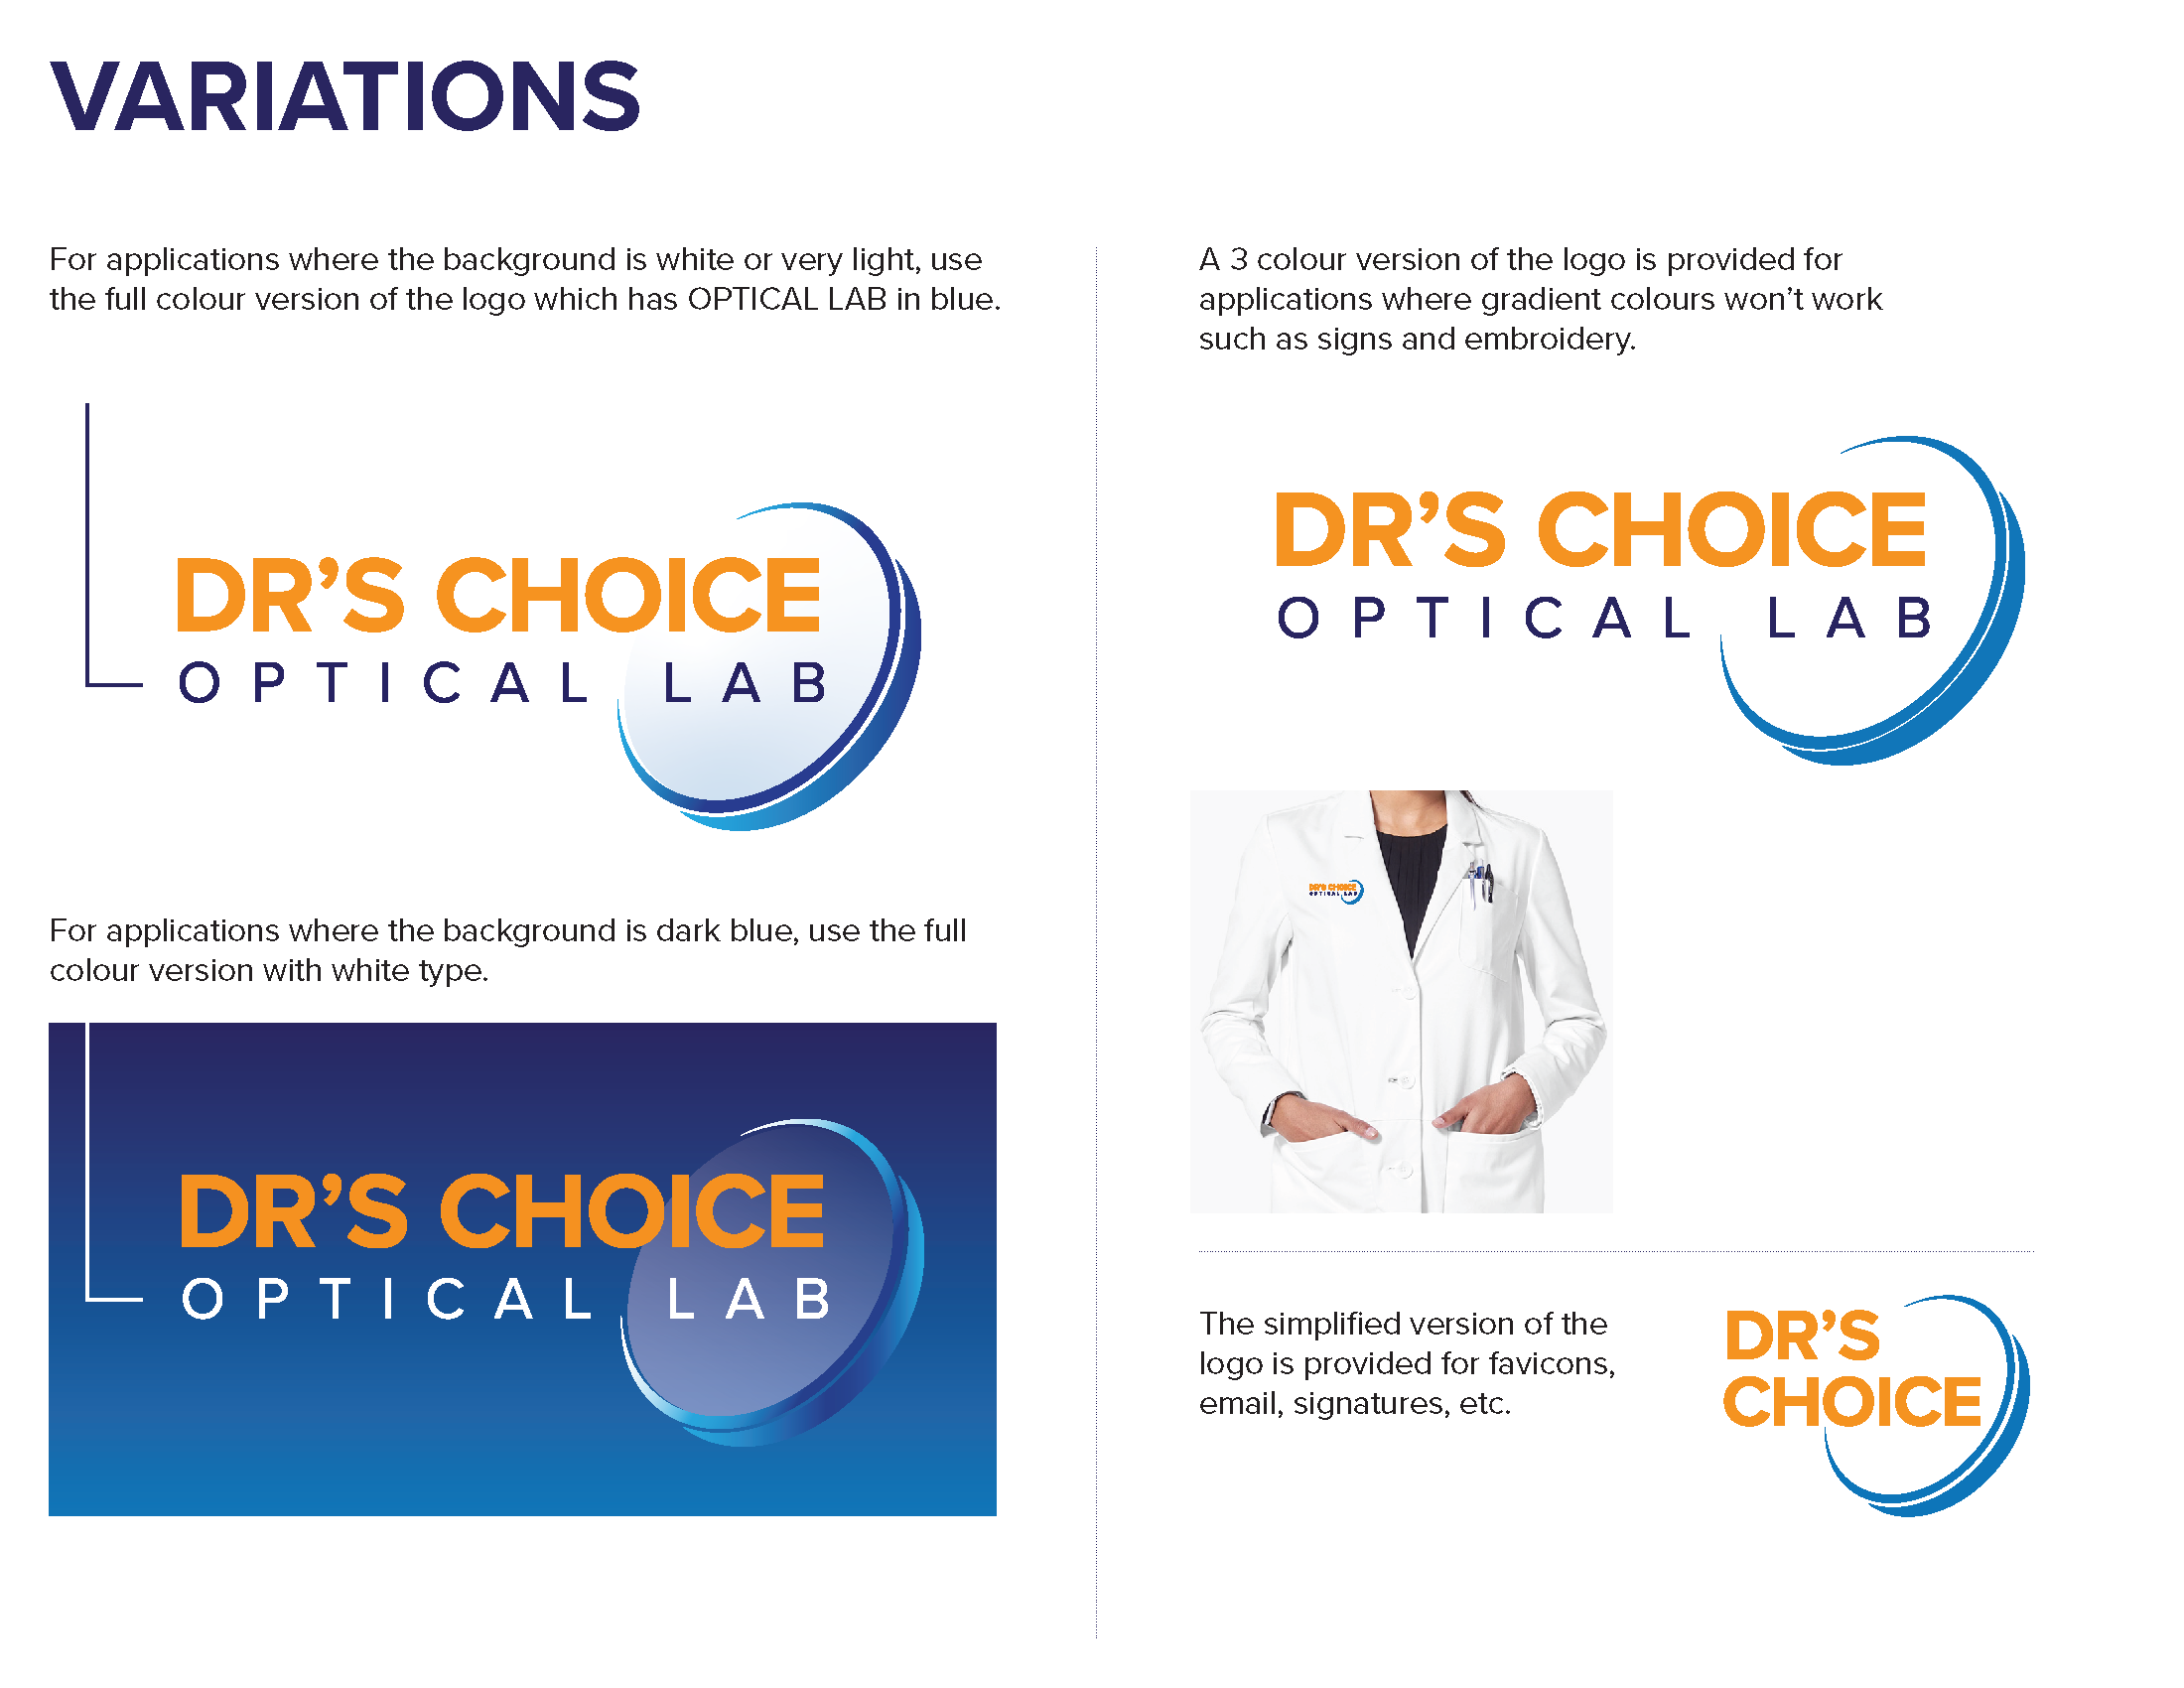 DRSCHOICE-BRANDGUIDE_Page_2.png